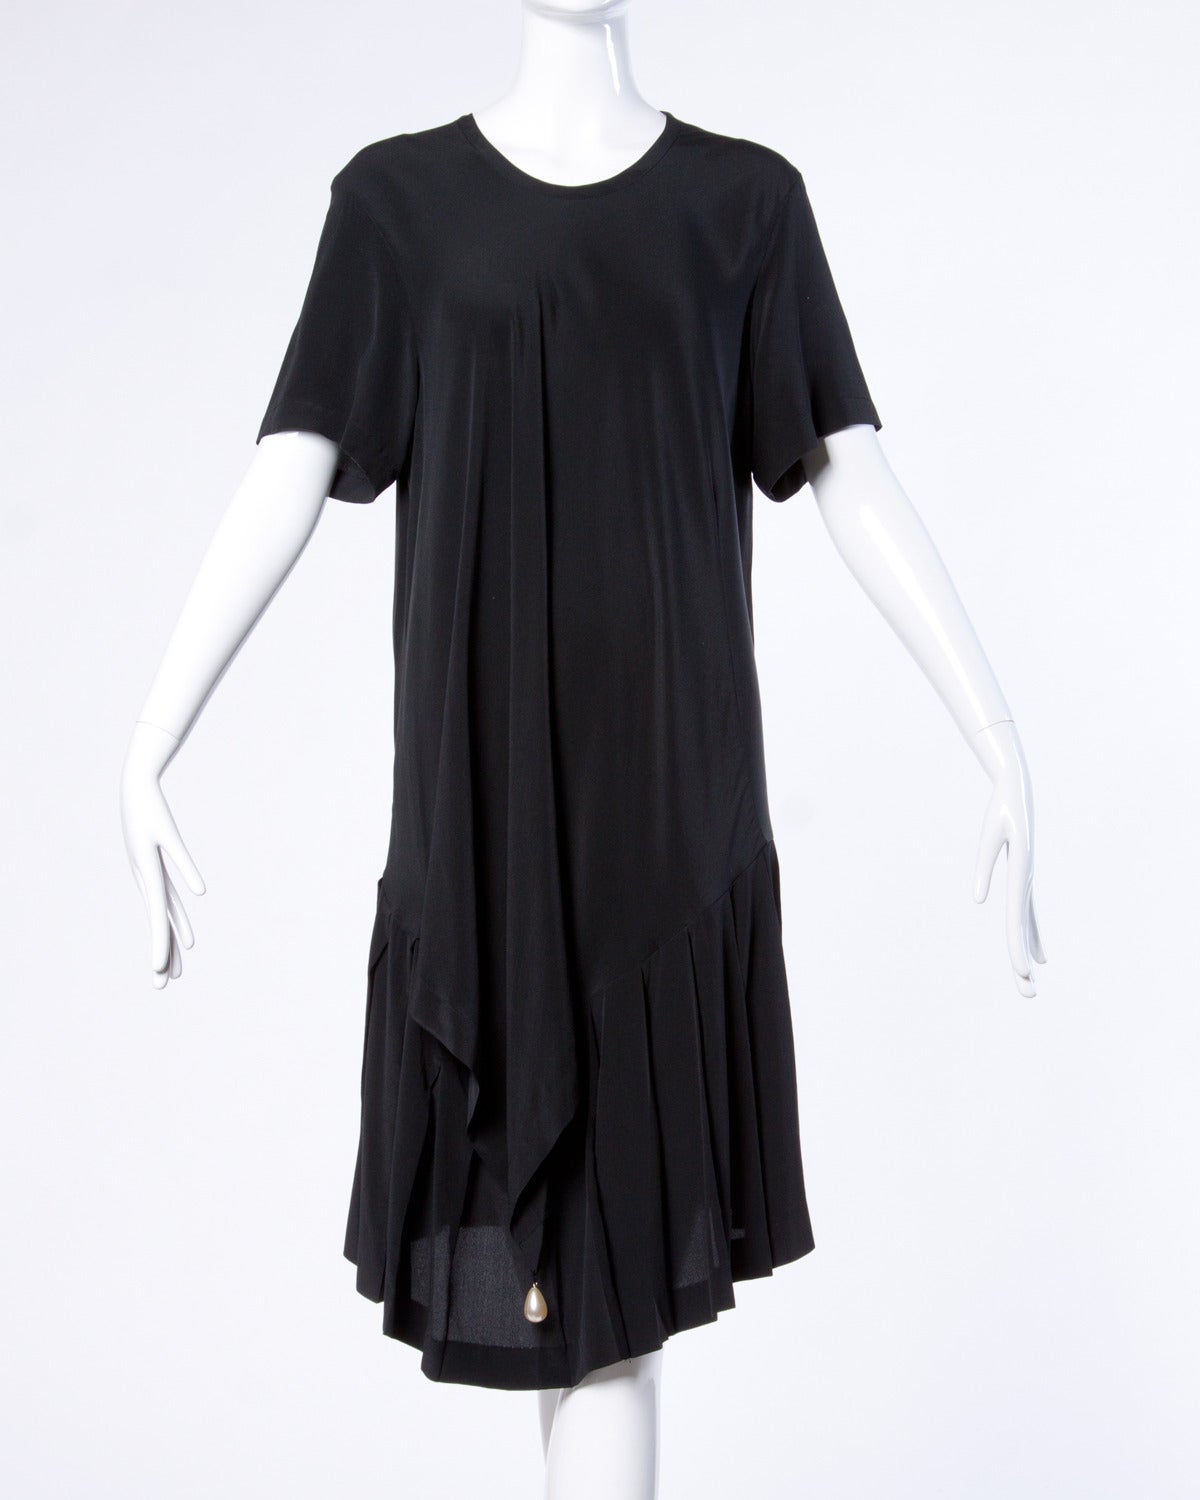 Avant garde black silk midi dress by Comme des Garcons. Asymmetric detail near the bottom of the dress where there is a pearl weight that can be tucked inside or worn outside the dress. Short sleeves and rounded